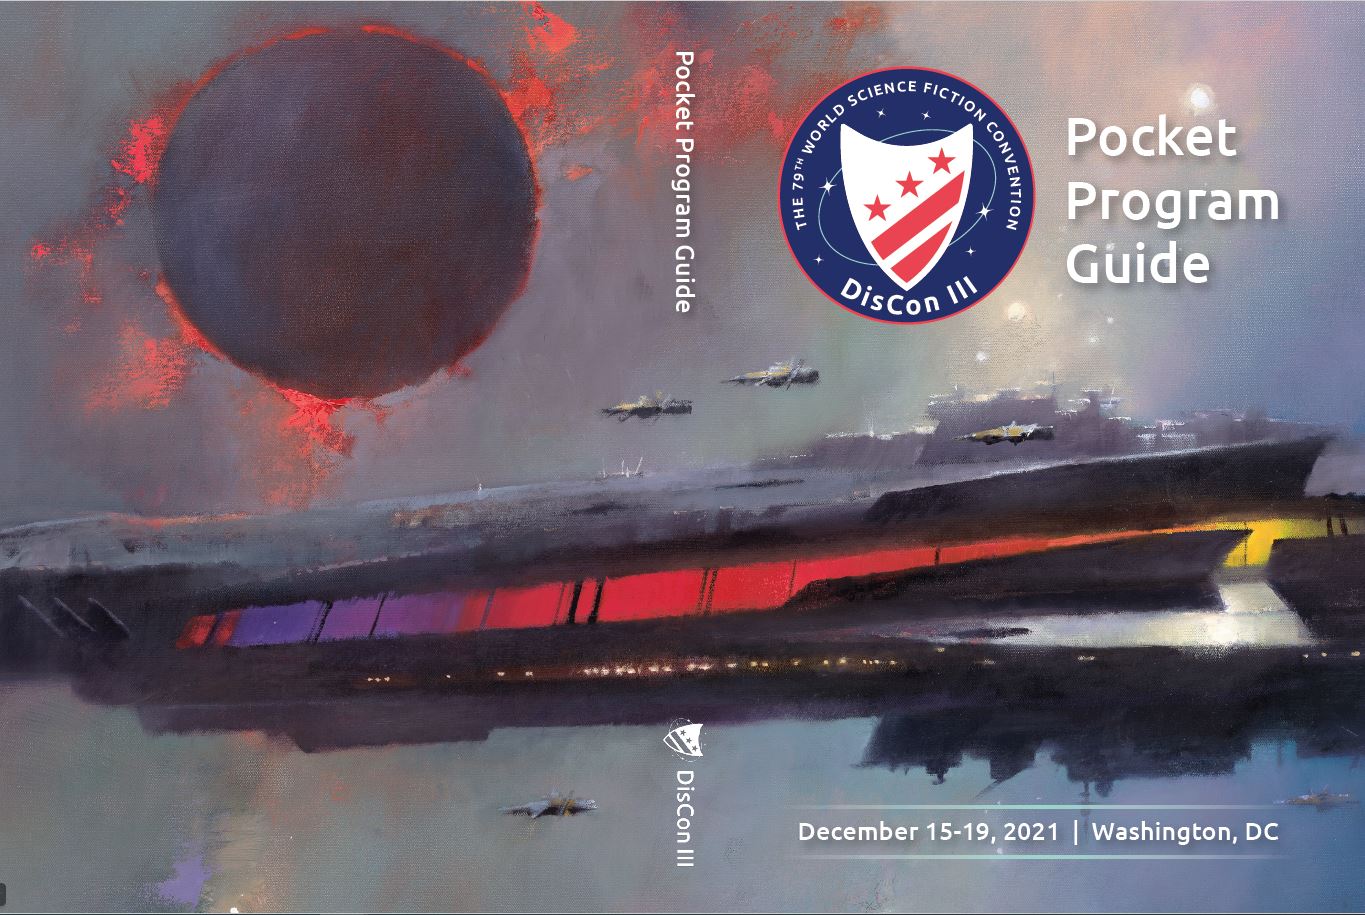 Front and back cover of the Pocket Program Guide. Cover depicts a piece of art showig a huge spaceship near a planet or moon. It is surrounded by a few smaller vessels.